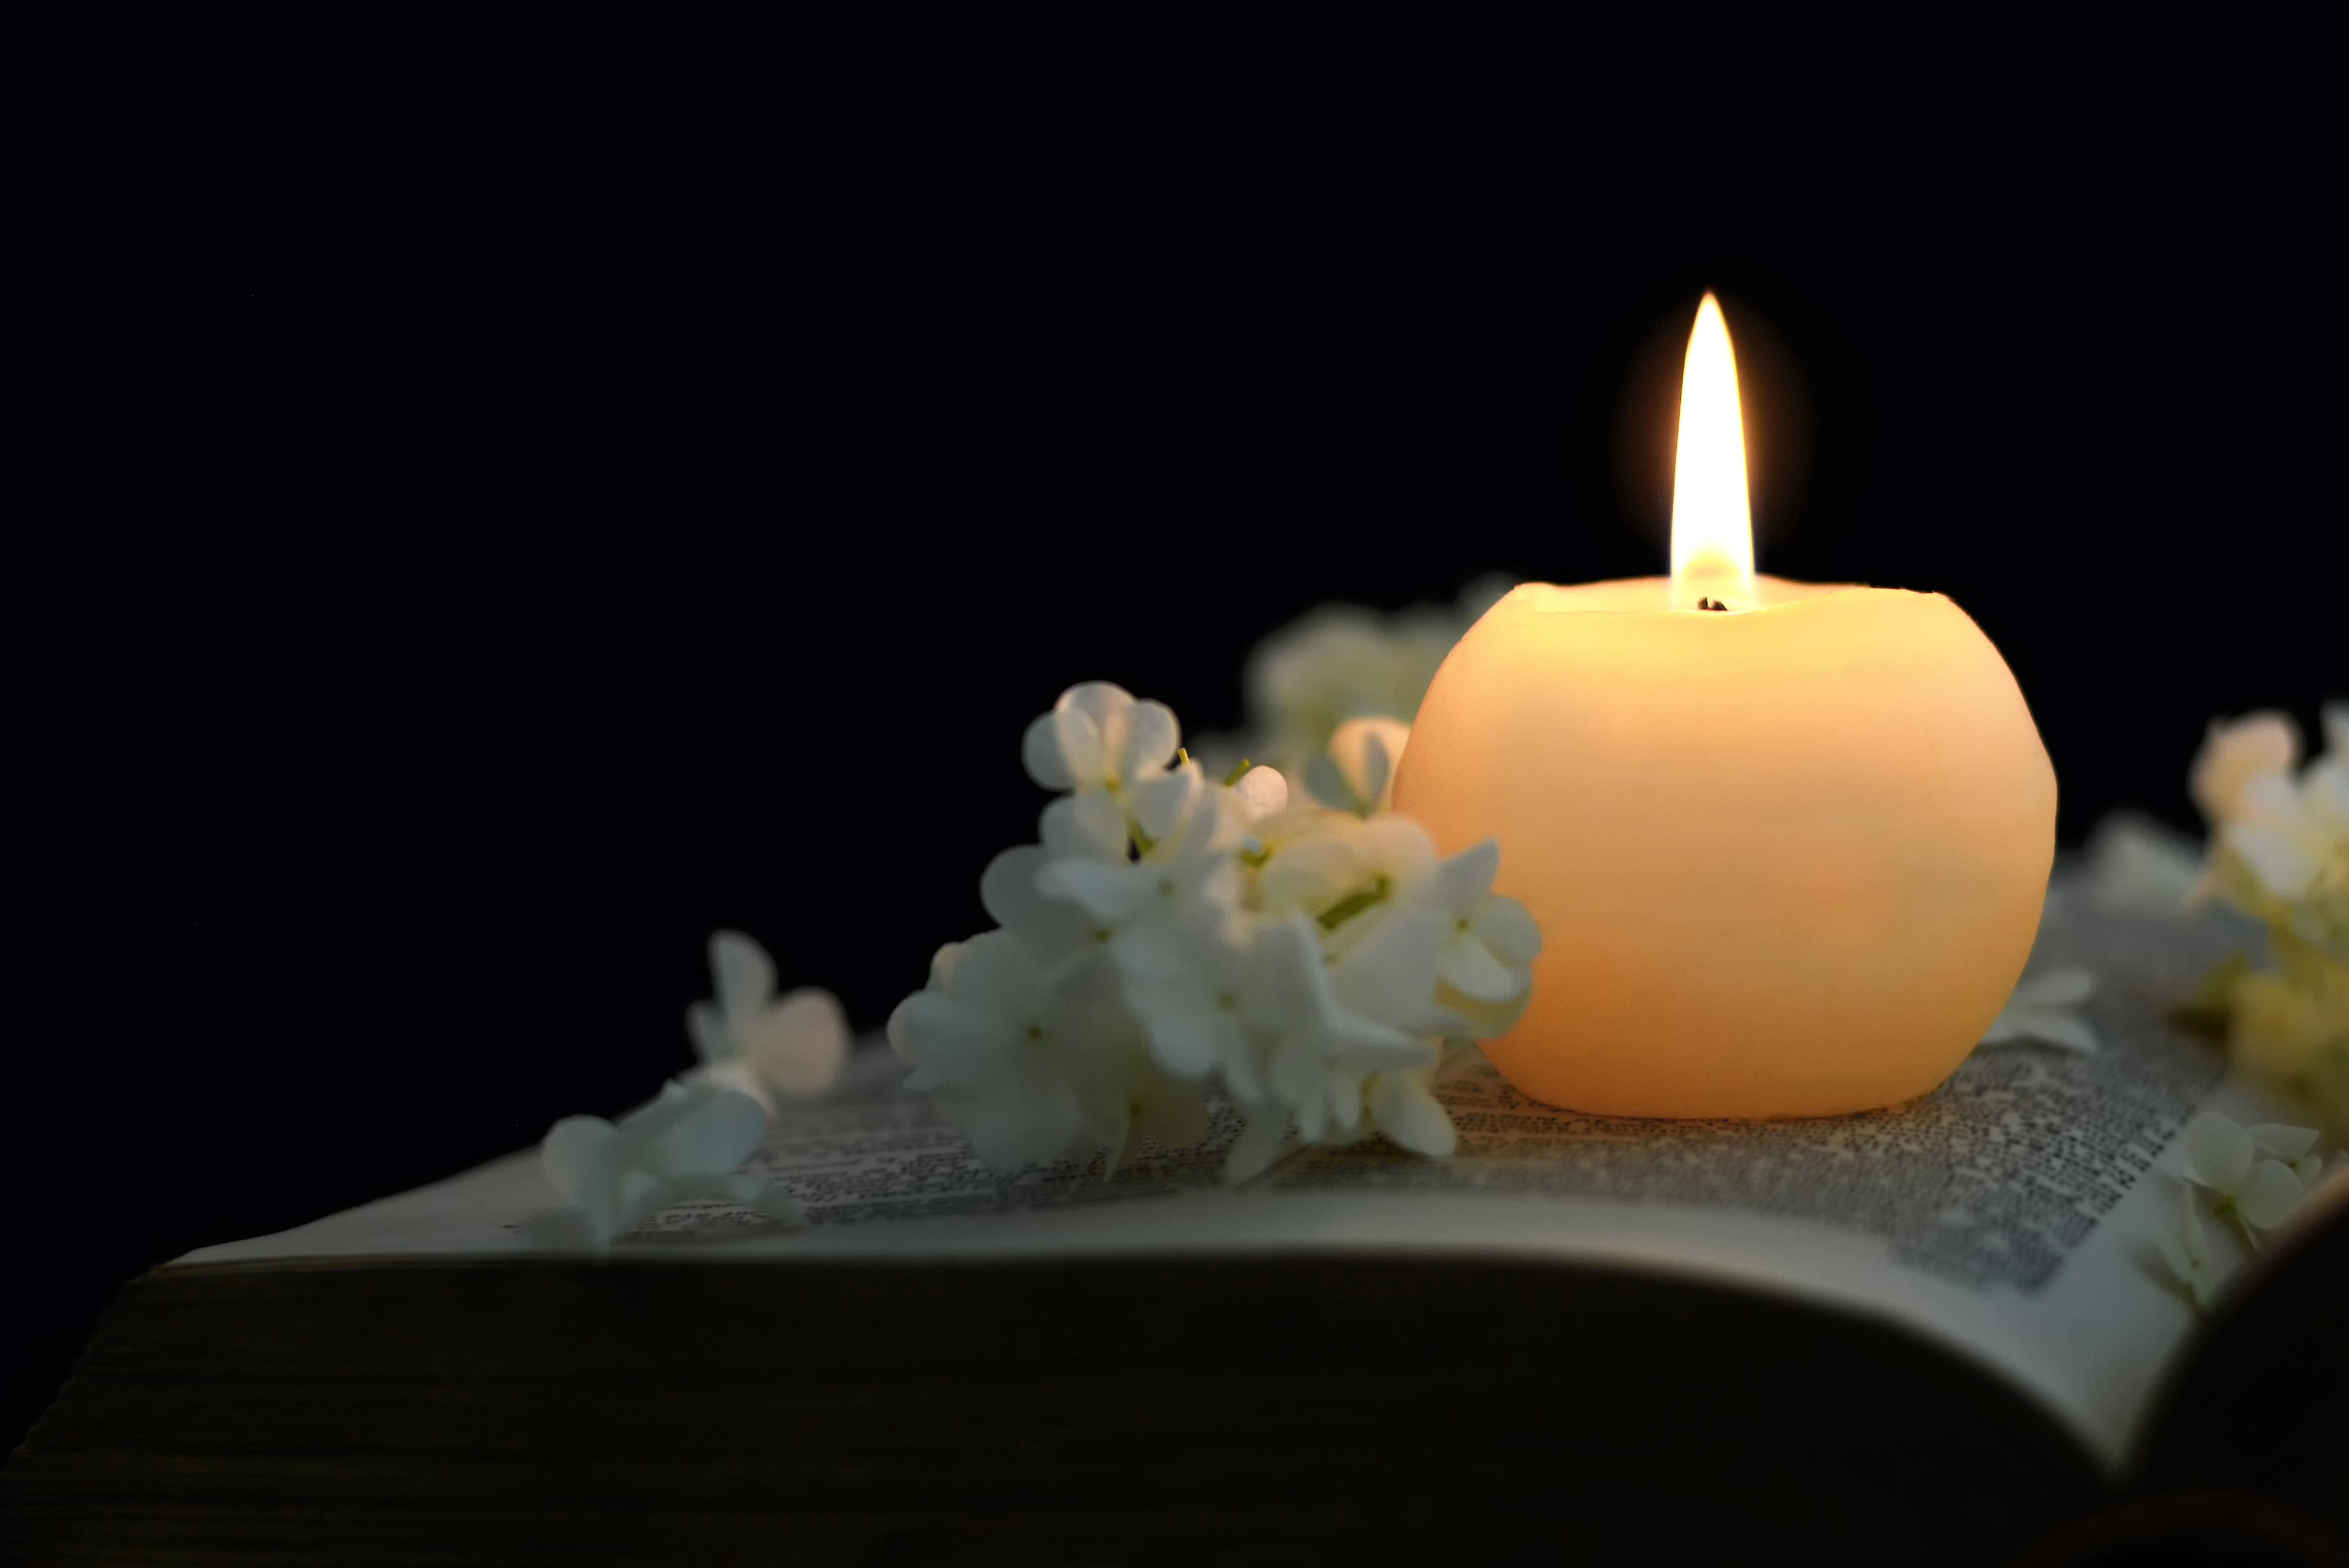 Candle and flowers on book